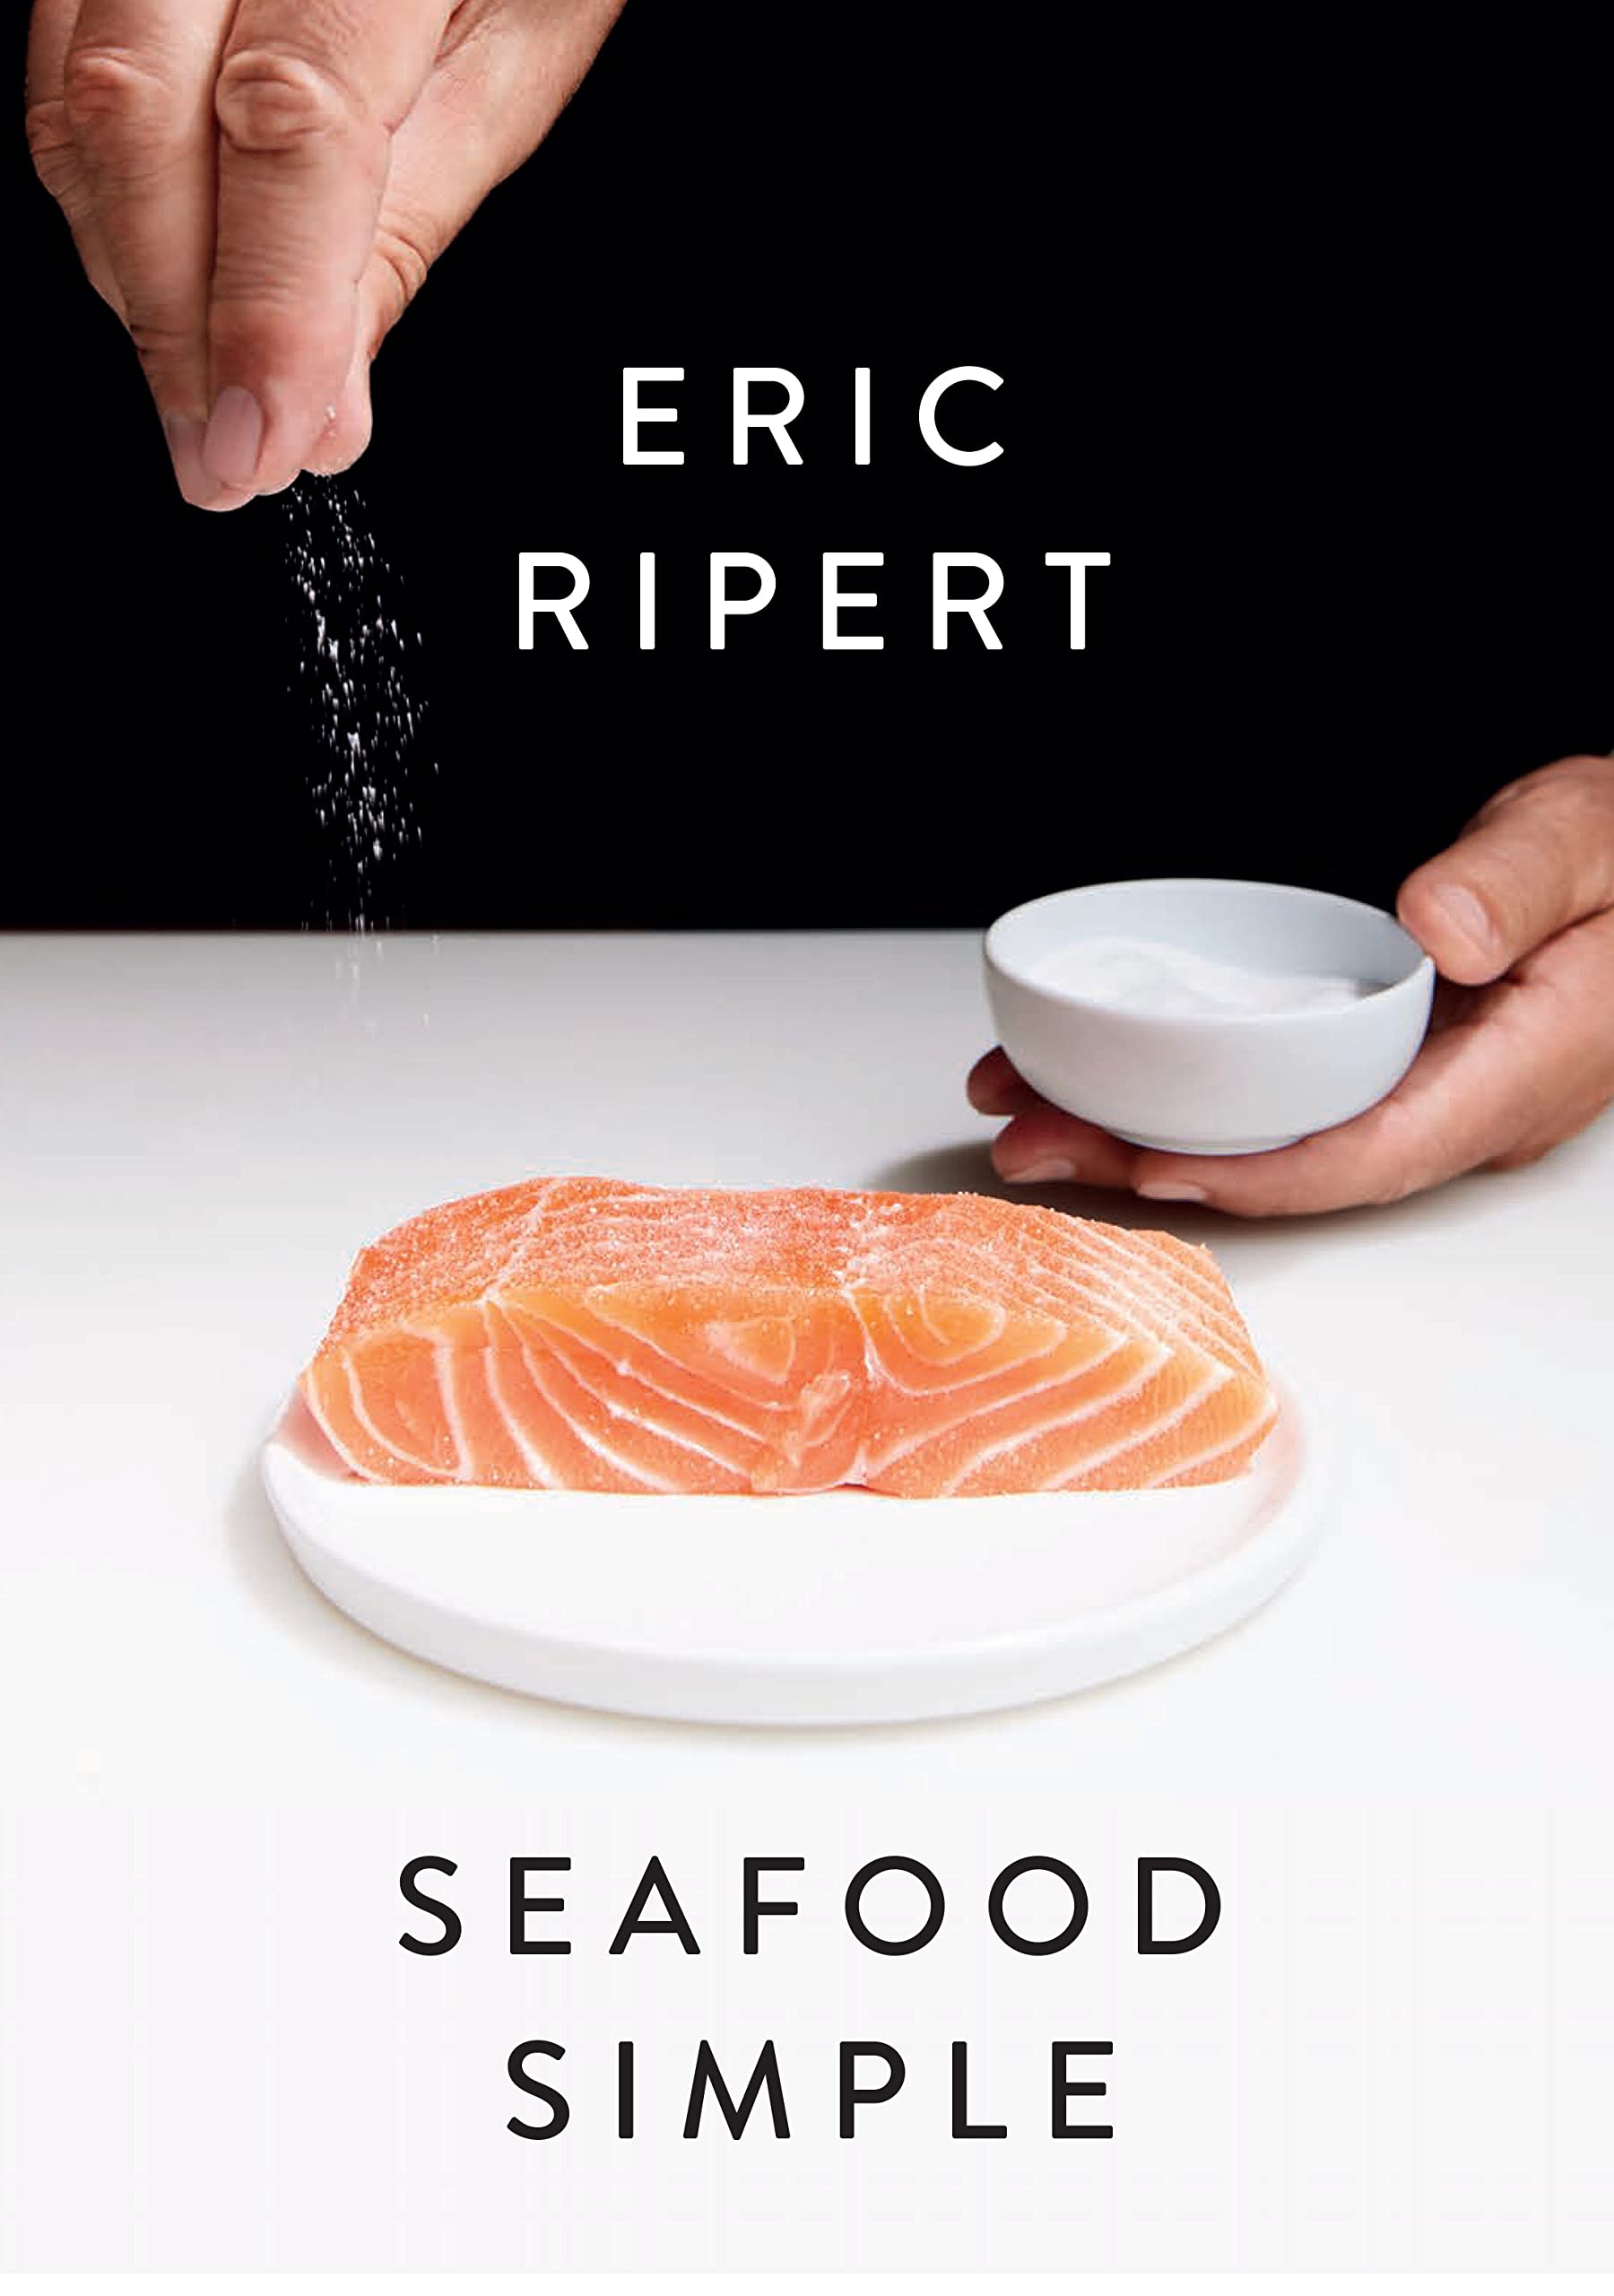 Seafood Simple (Eric Ripert) *Signed*